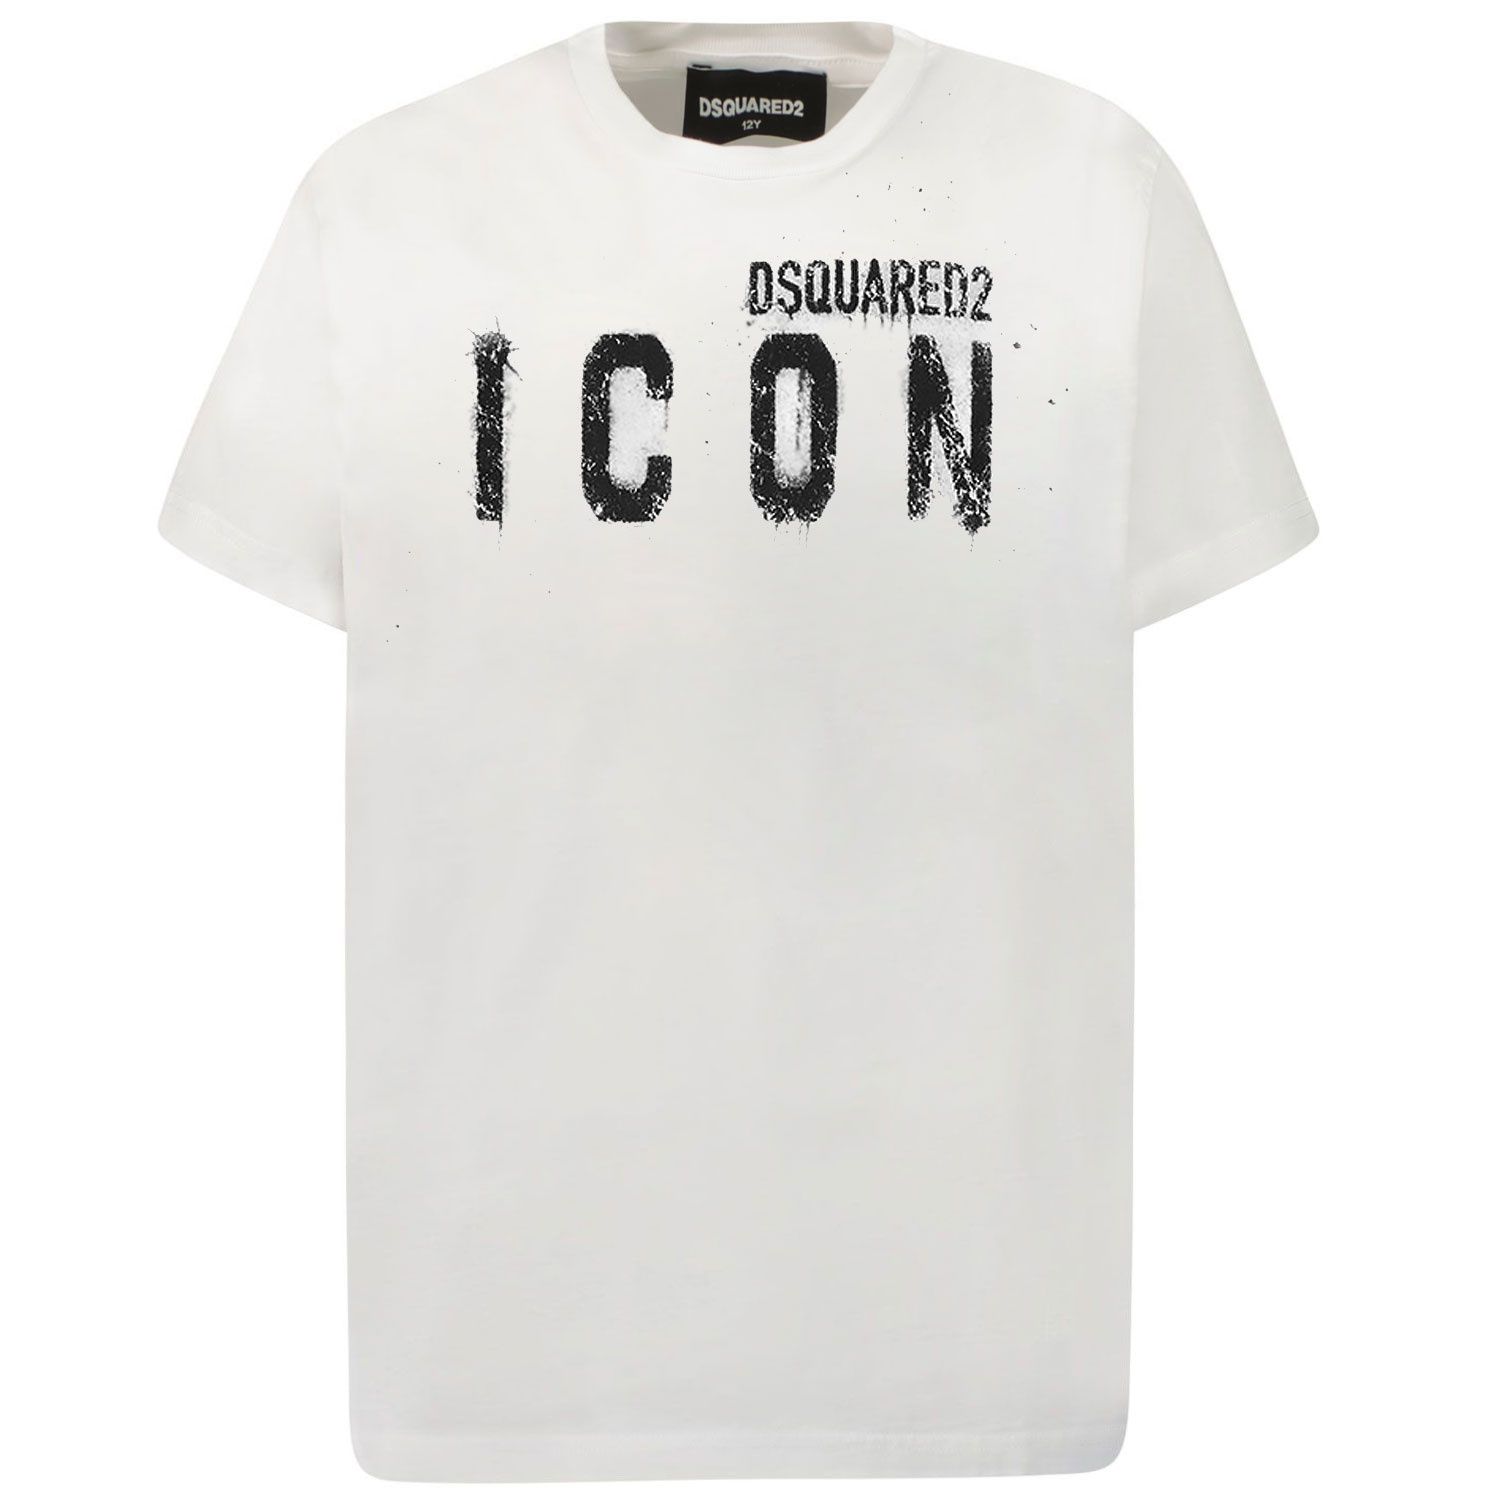 Picture of Dsquared2 DQ0926 kids t-shirt white